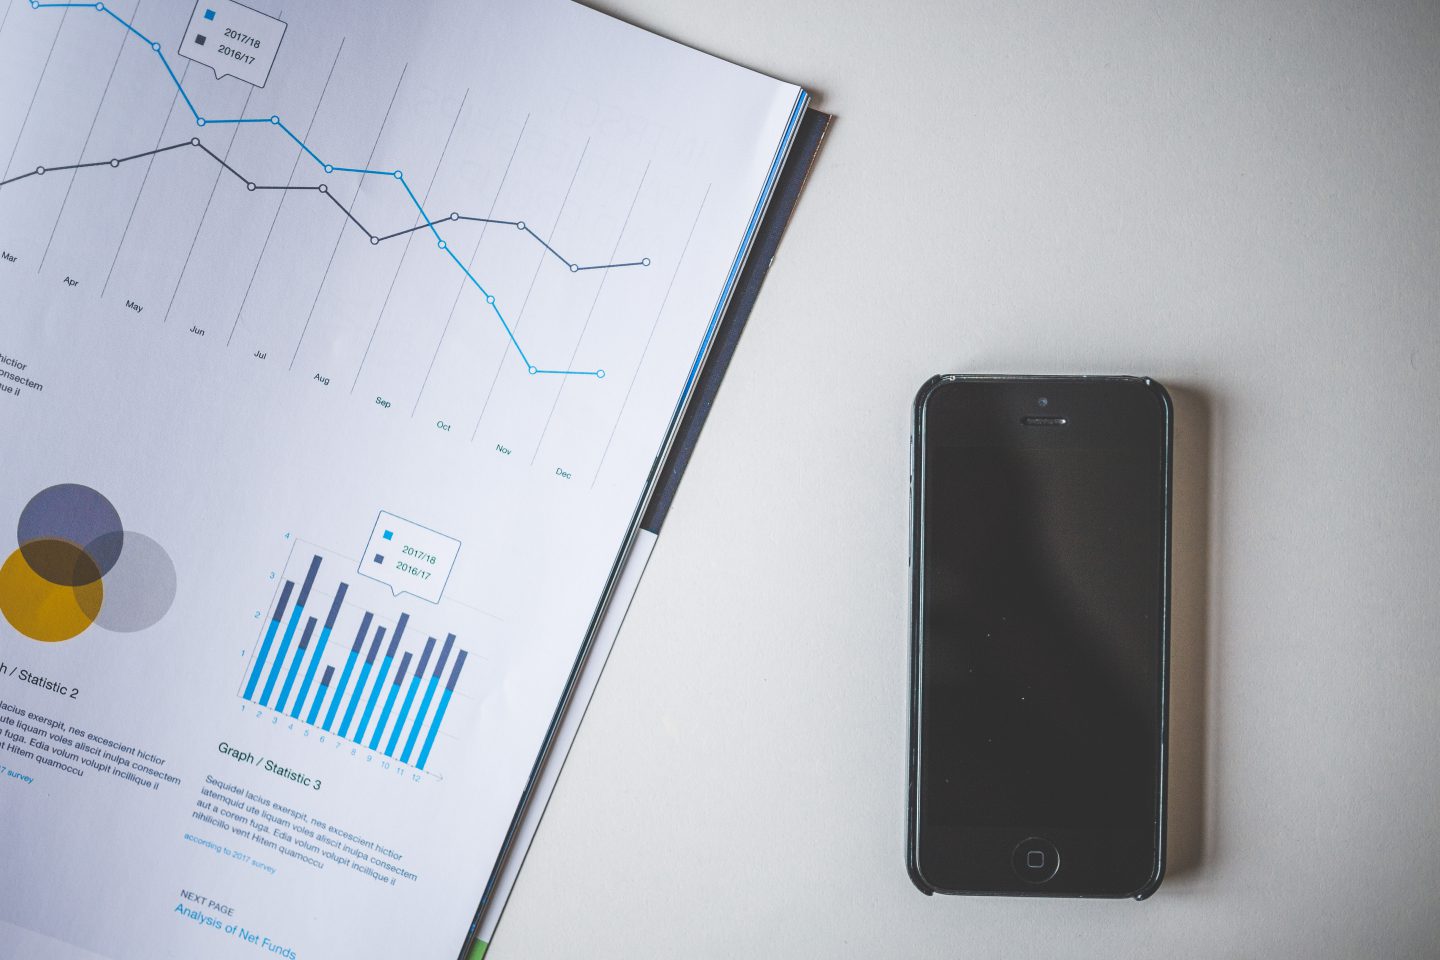 iPhone and documents containing graphs and charts